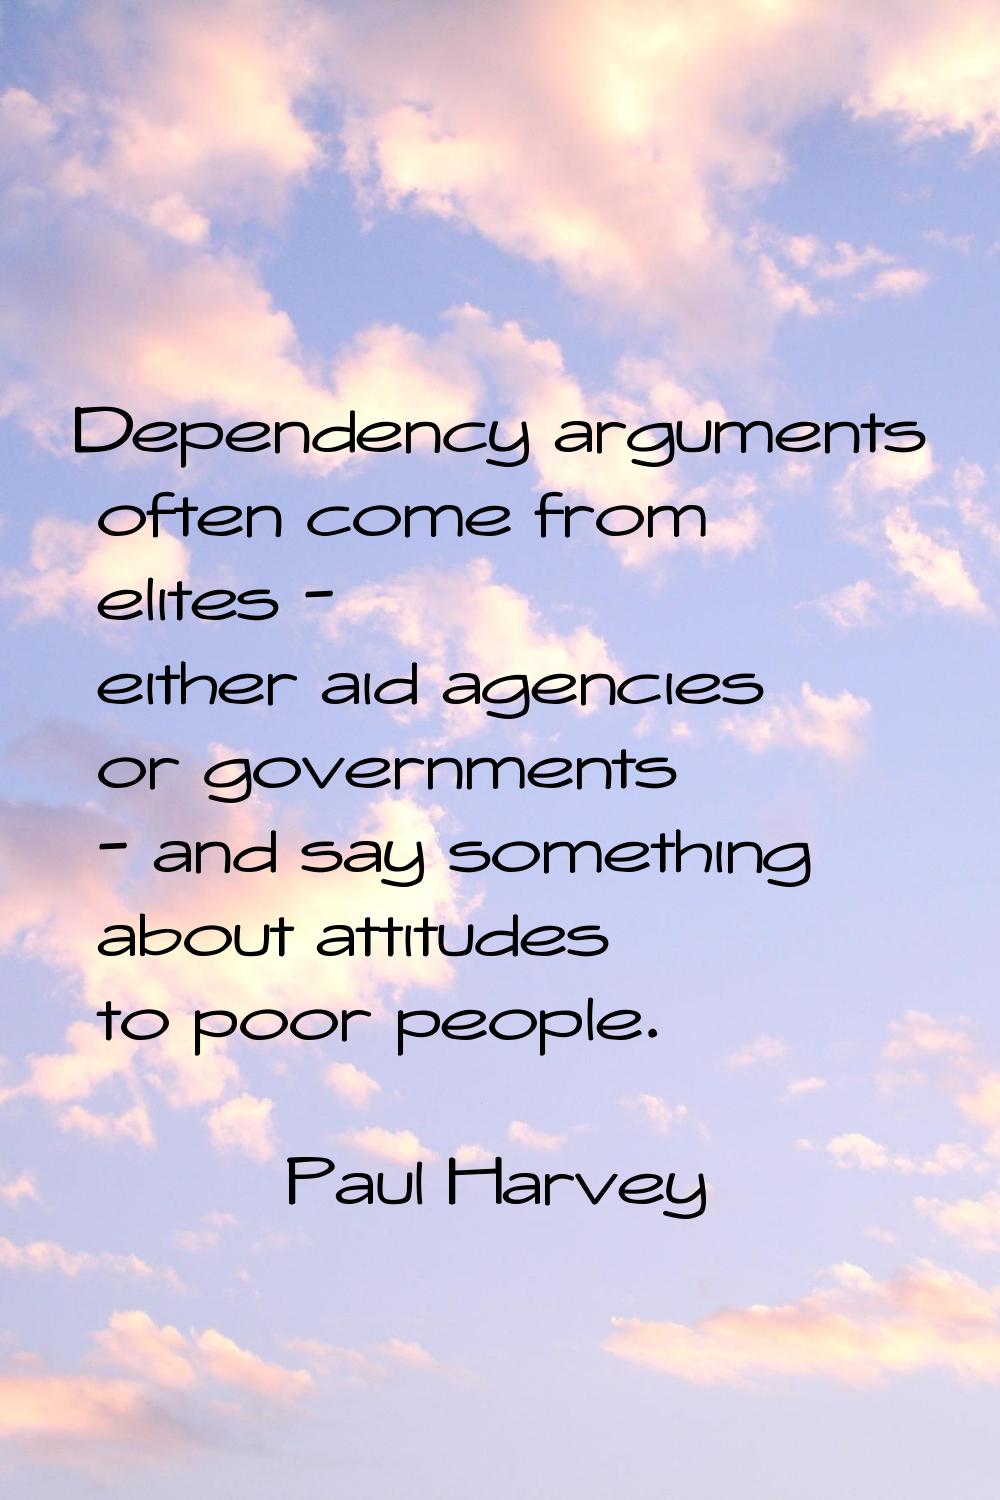 Dependency arguments often come from elites - either aid agencies or governments - and say somethin